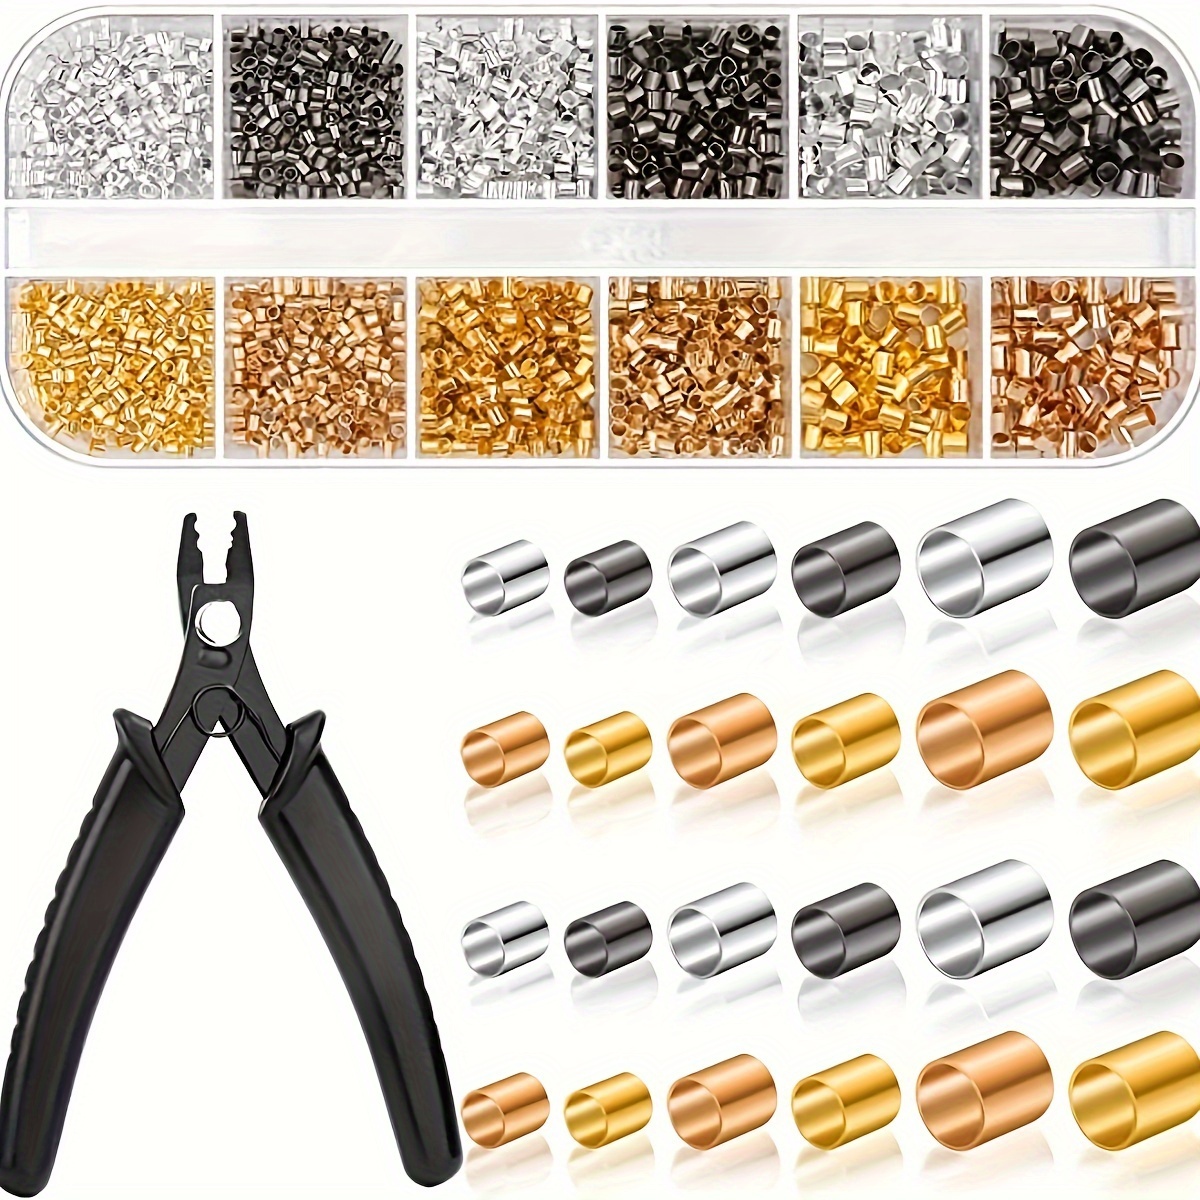 

1 Set Of Golden Silver Crimping Beads Wire Protection Lobster Buckle Jump Ring And Bending Nose Pliers For Diy Jewelry Making Supplies Kit